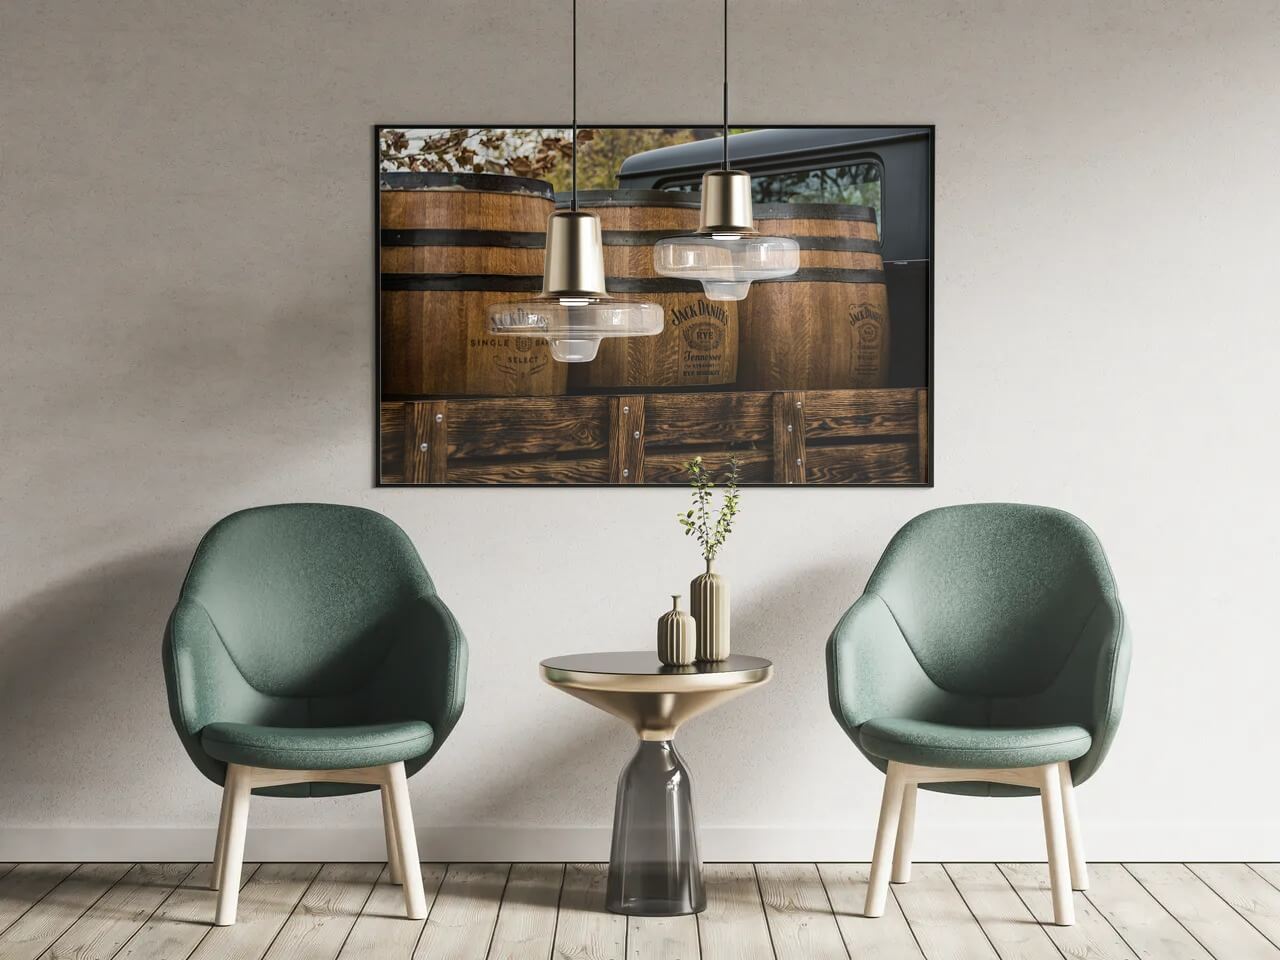  Shop now lifestyle collection. Image featuring a jack daniel's barrels photography placed on the wall